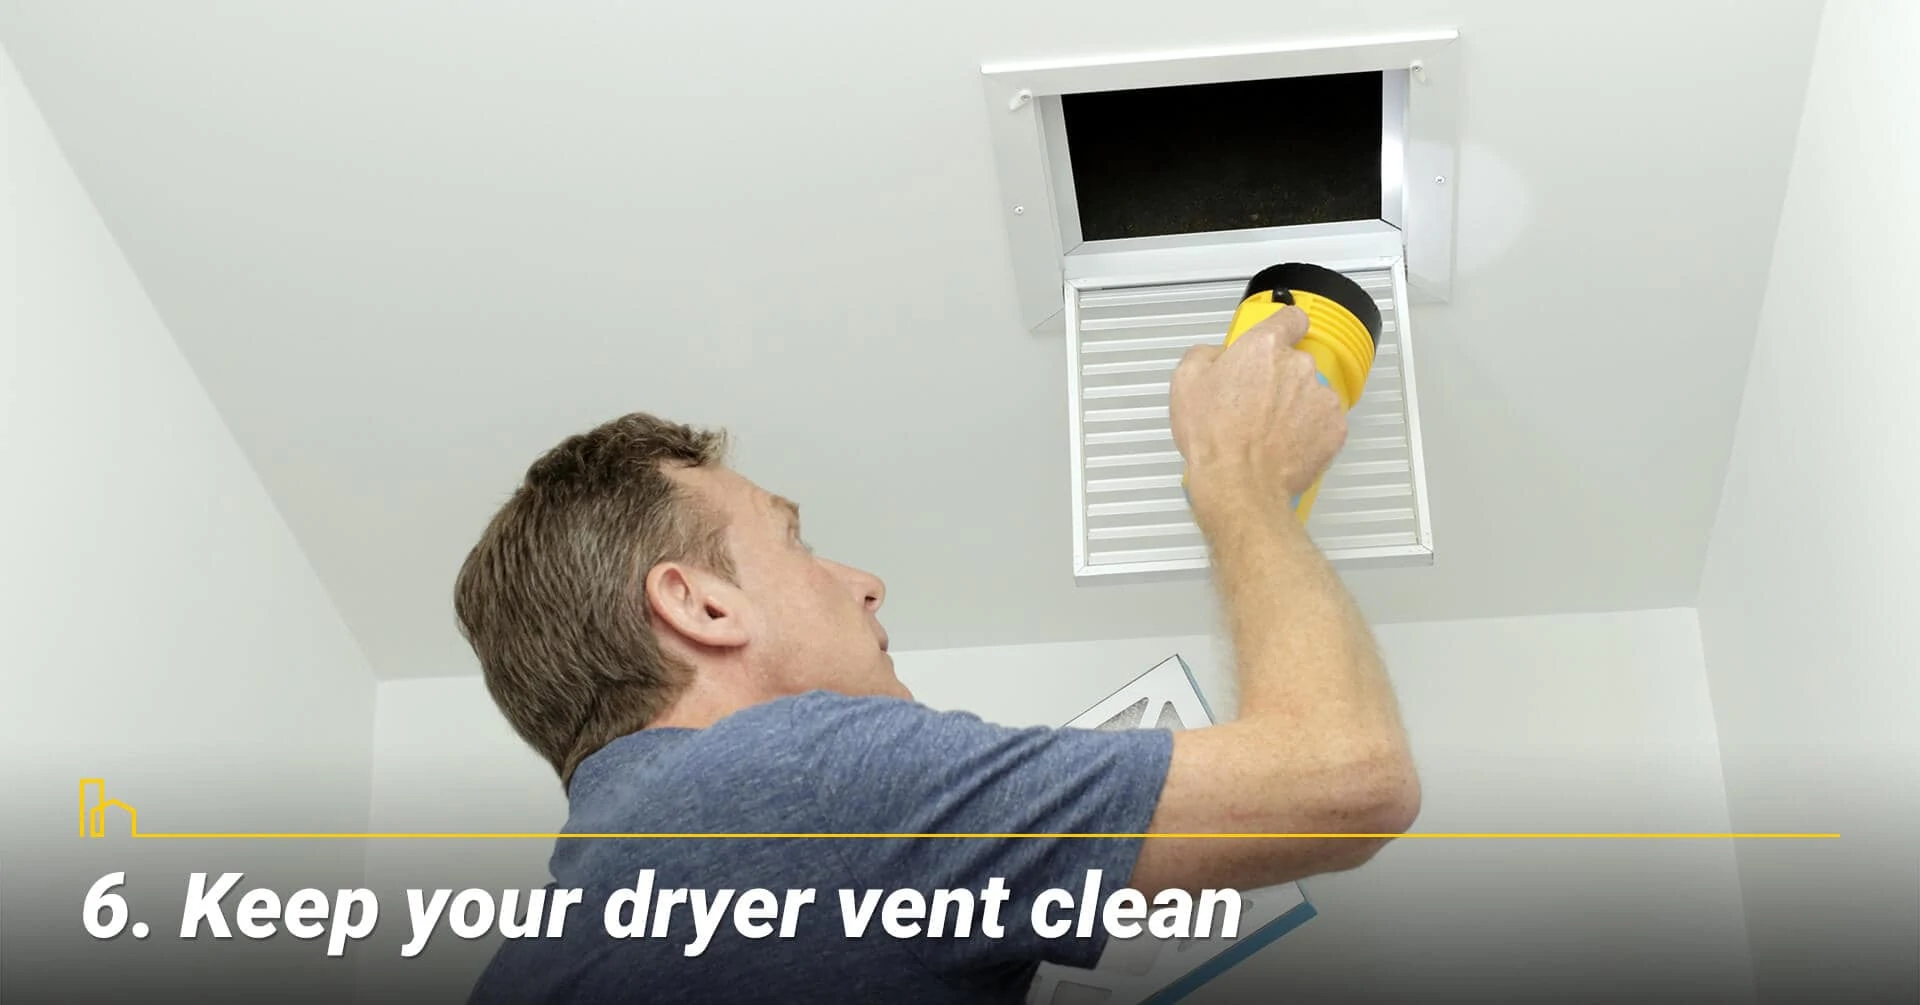 Keep your dryer vent clean, clean dryer vent